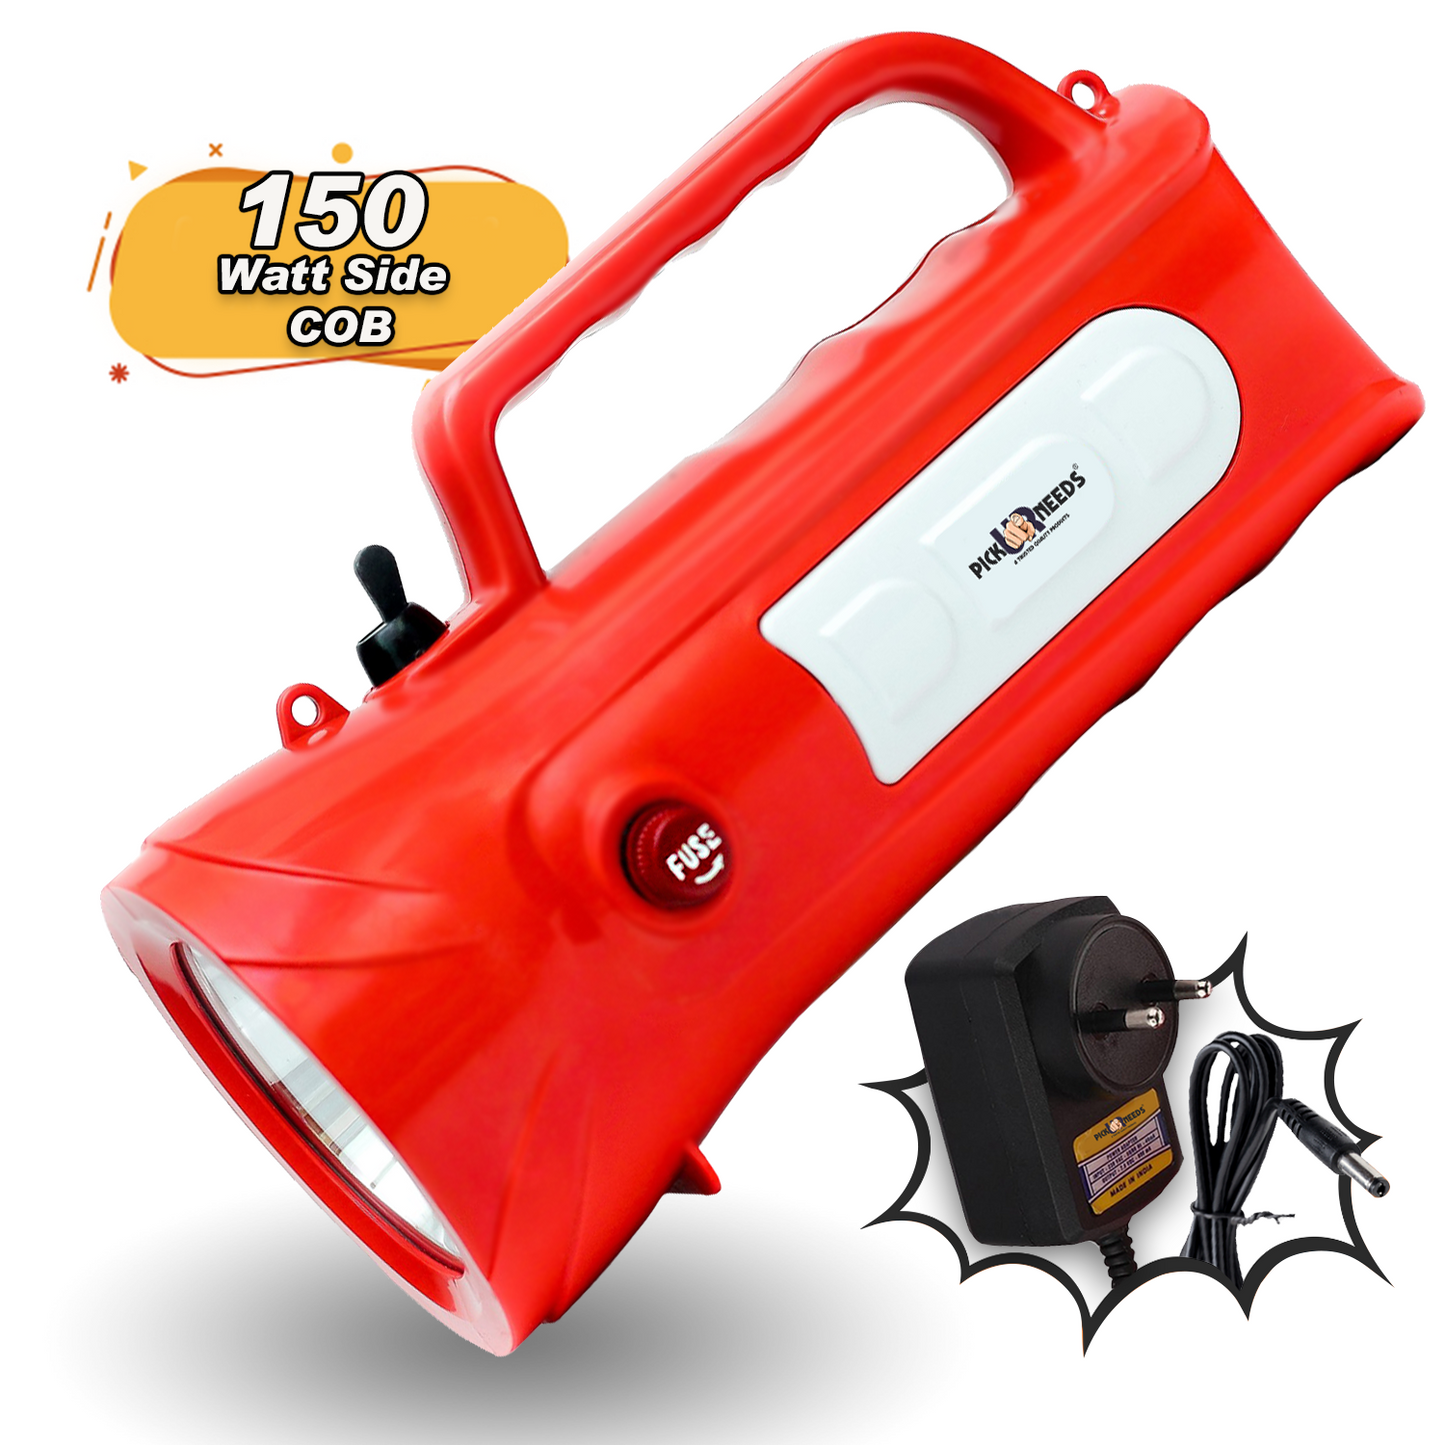 Pick Ur Needs Emergency Rechargable Torch Long Range Search Light 150W+Side COB 6 hrs Torch